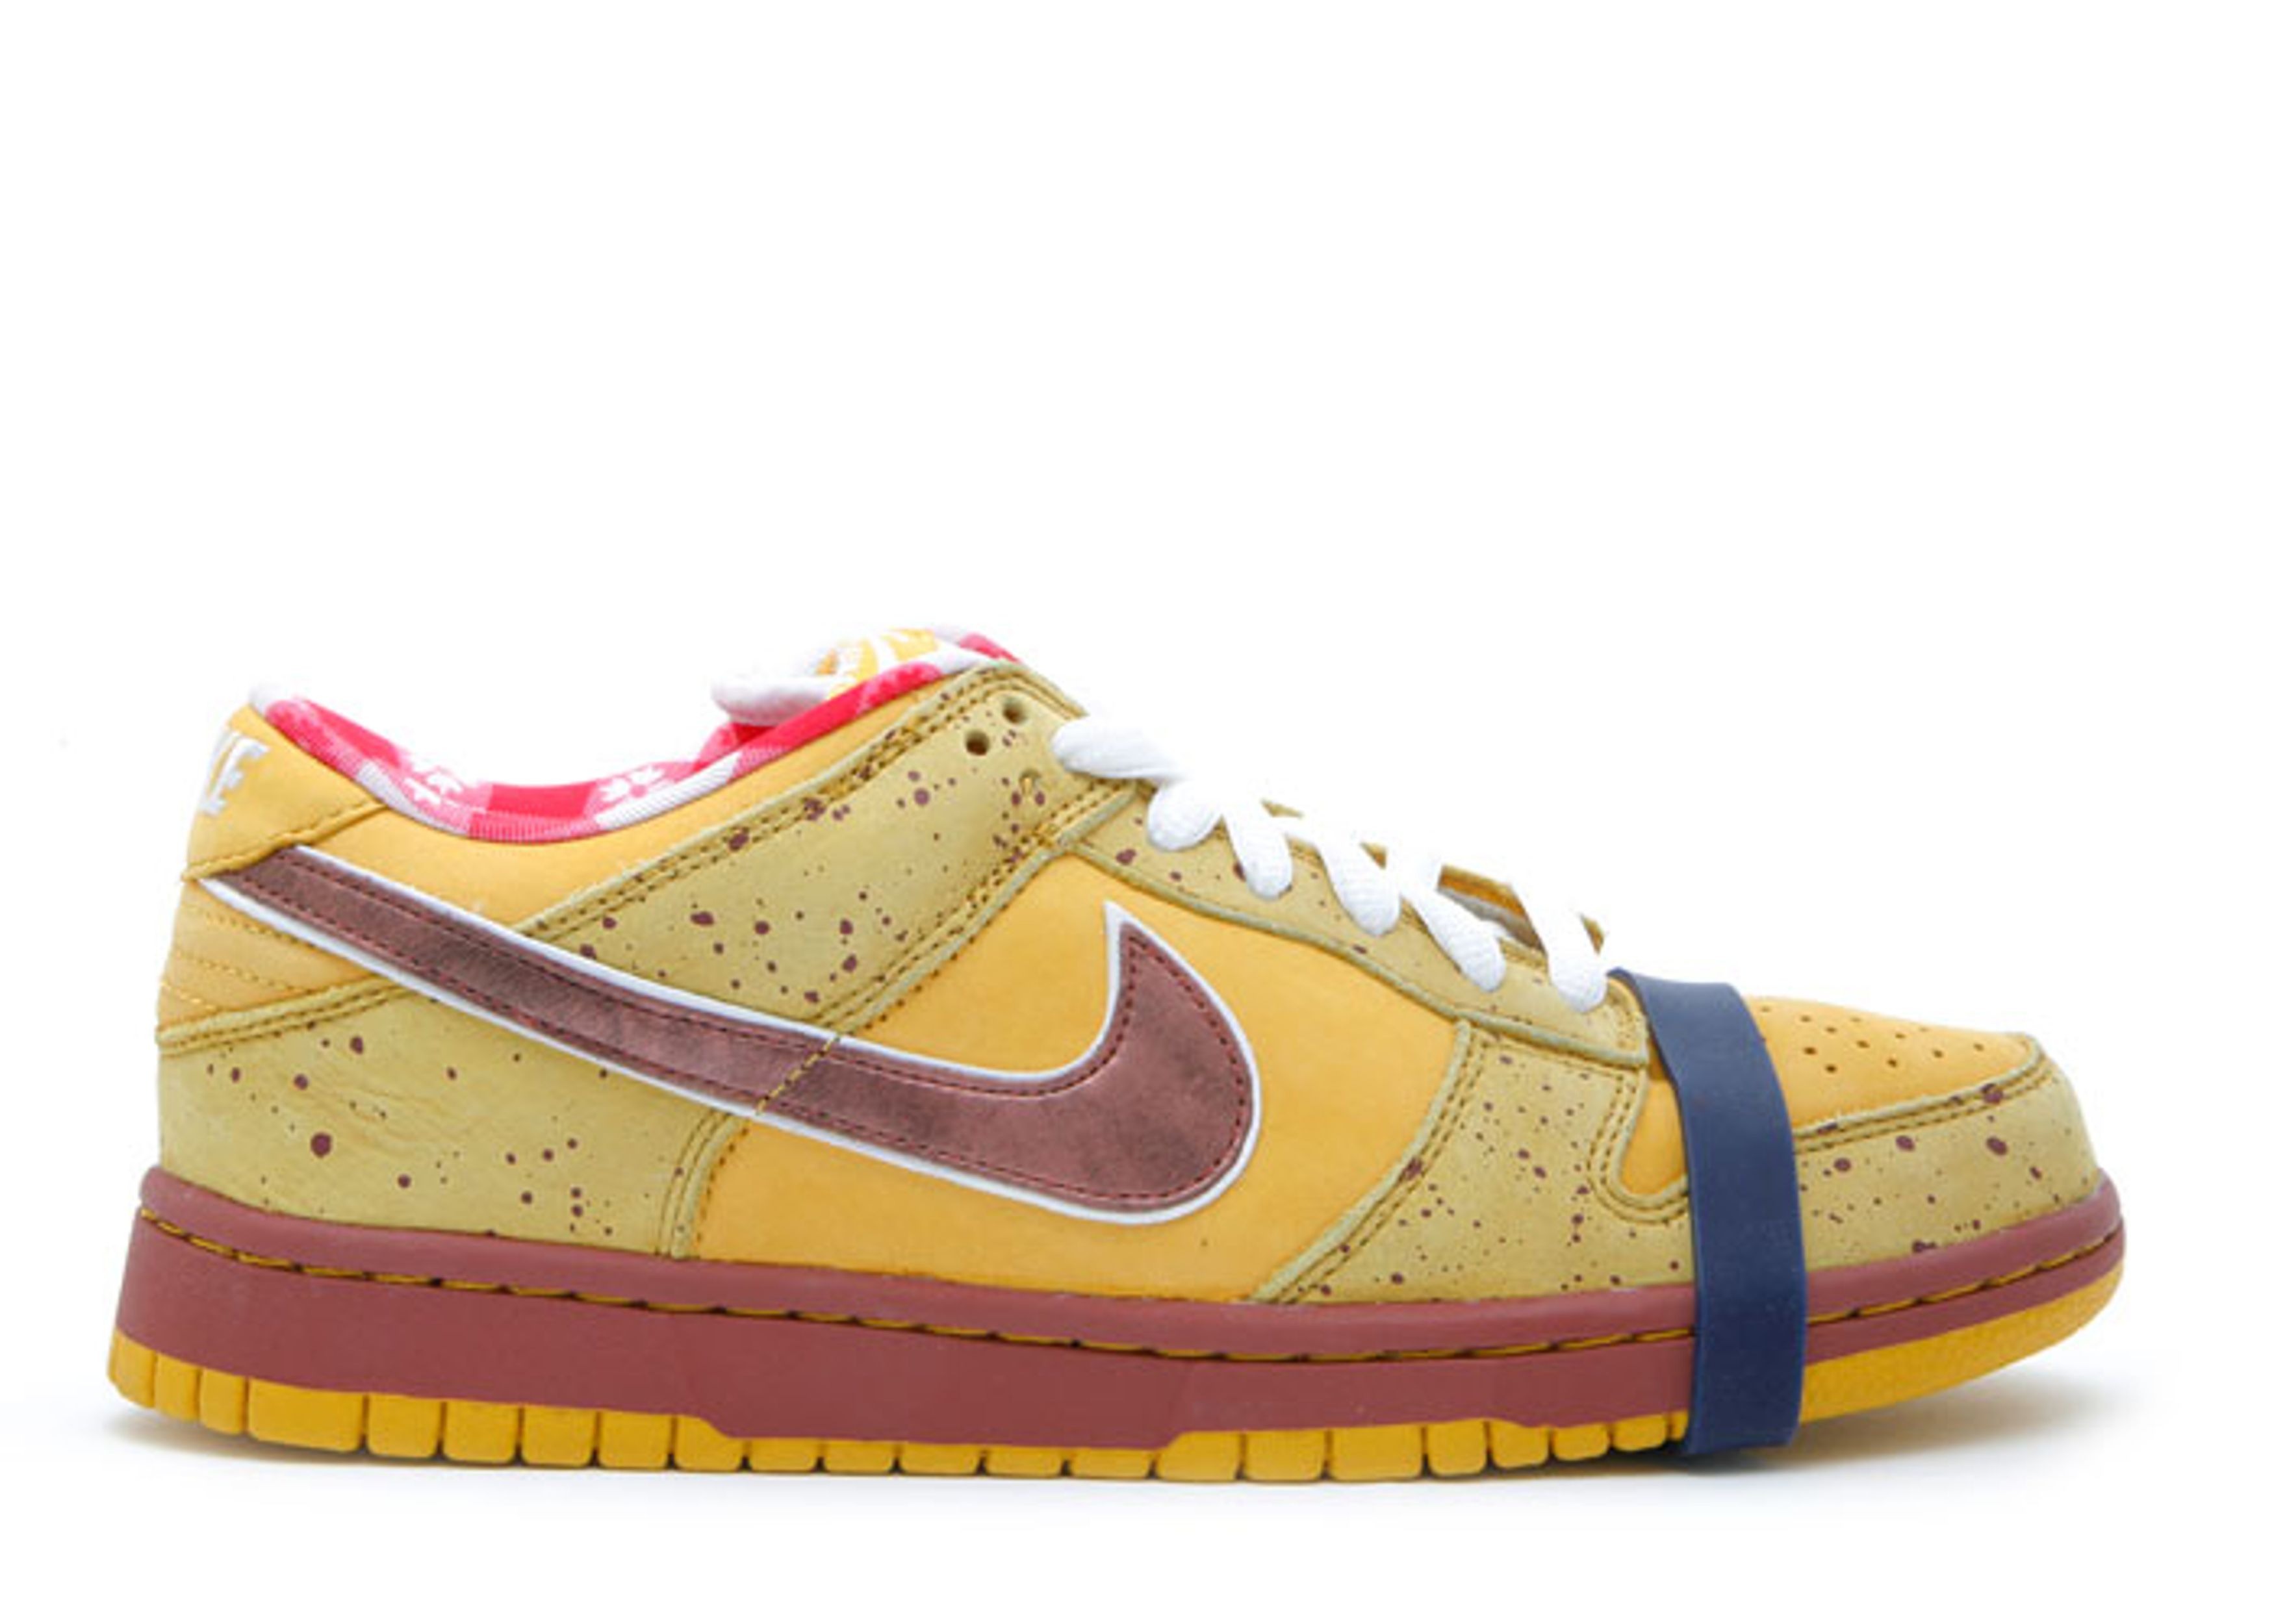 Concepts X Dunk Low OG SB QS 'White Lobster' Friends & Family - Nike - FD8776  100 - white/photon dust/pure